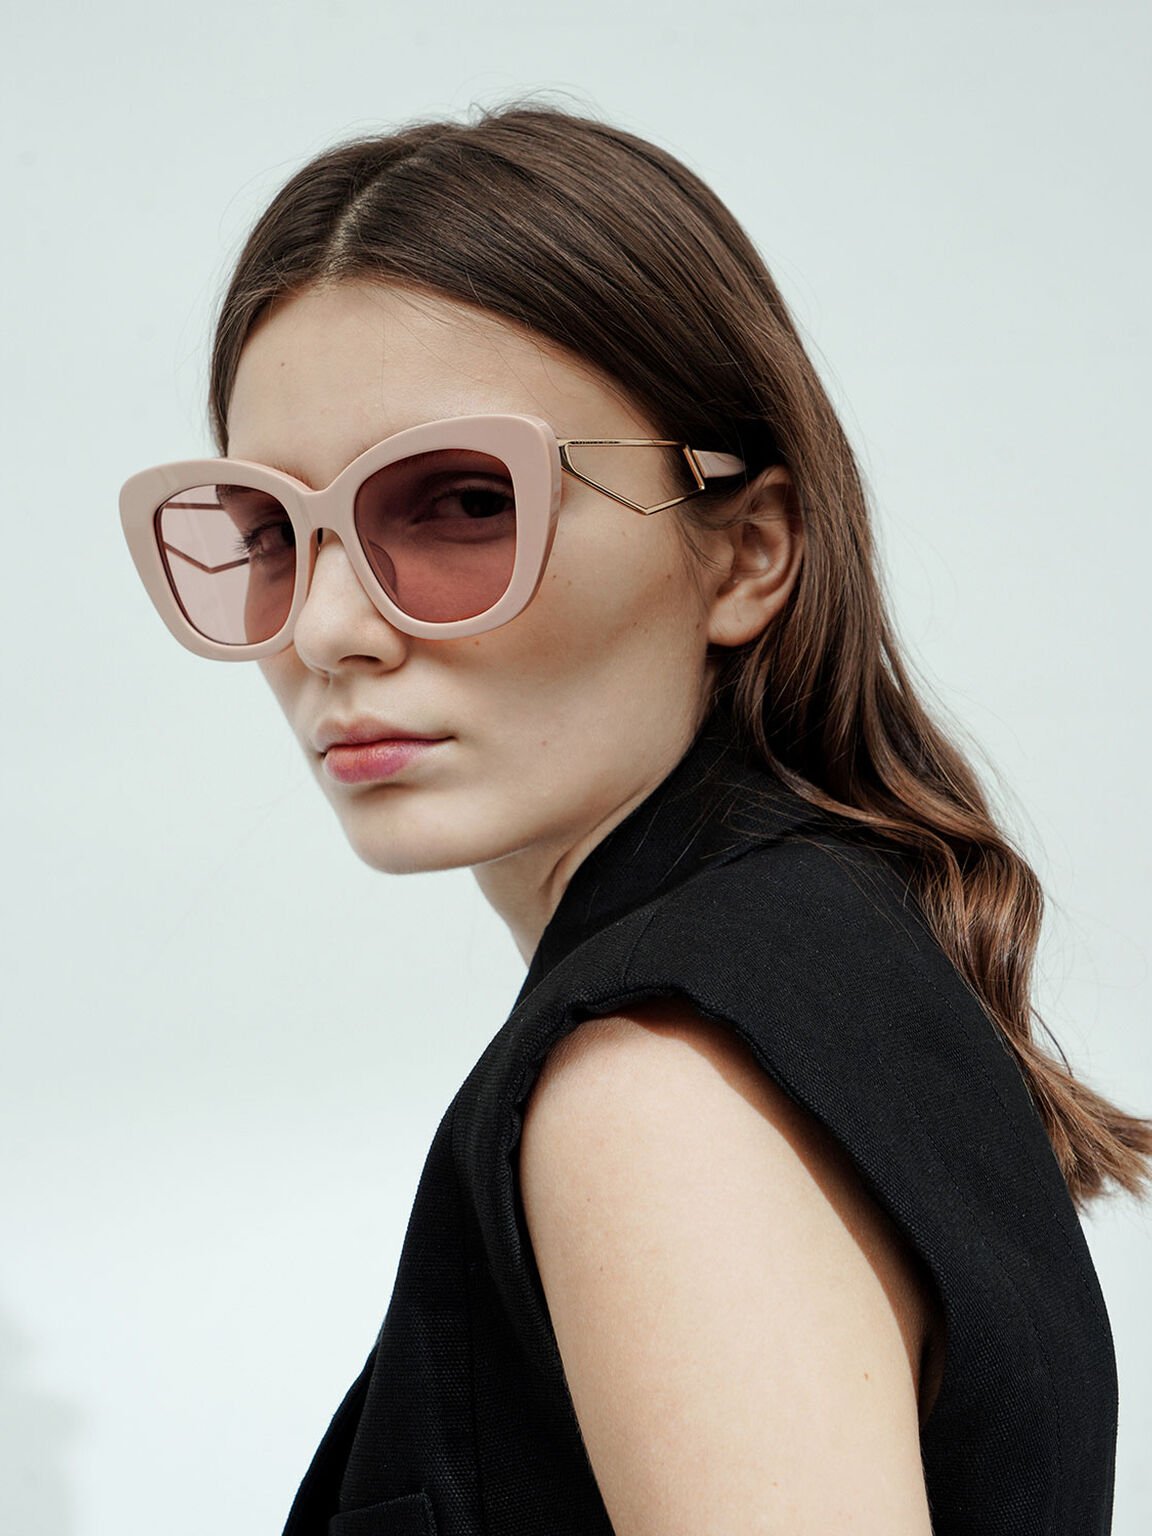 Acetate Butterfly Sunglasses, Pink, hi-res